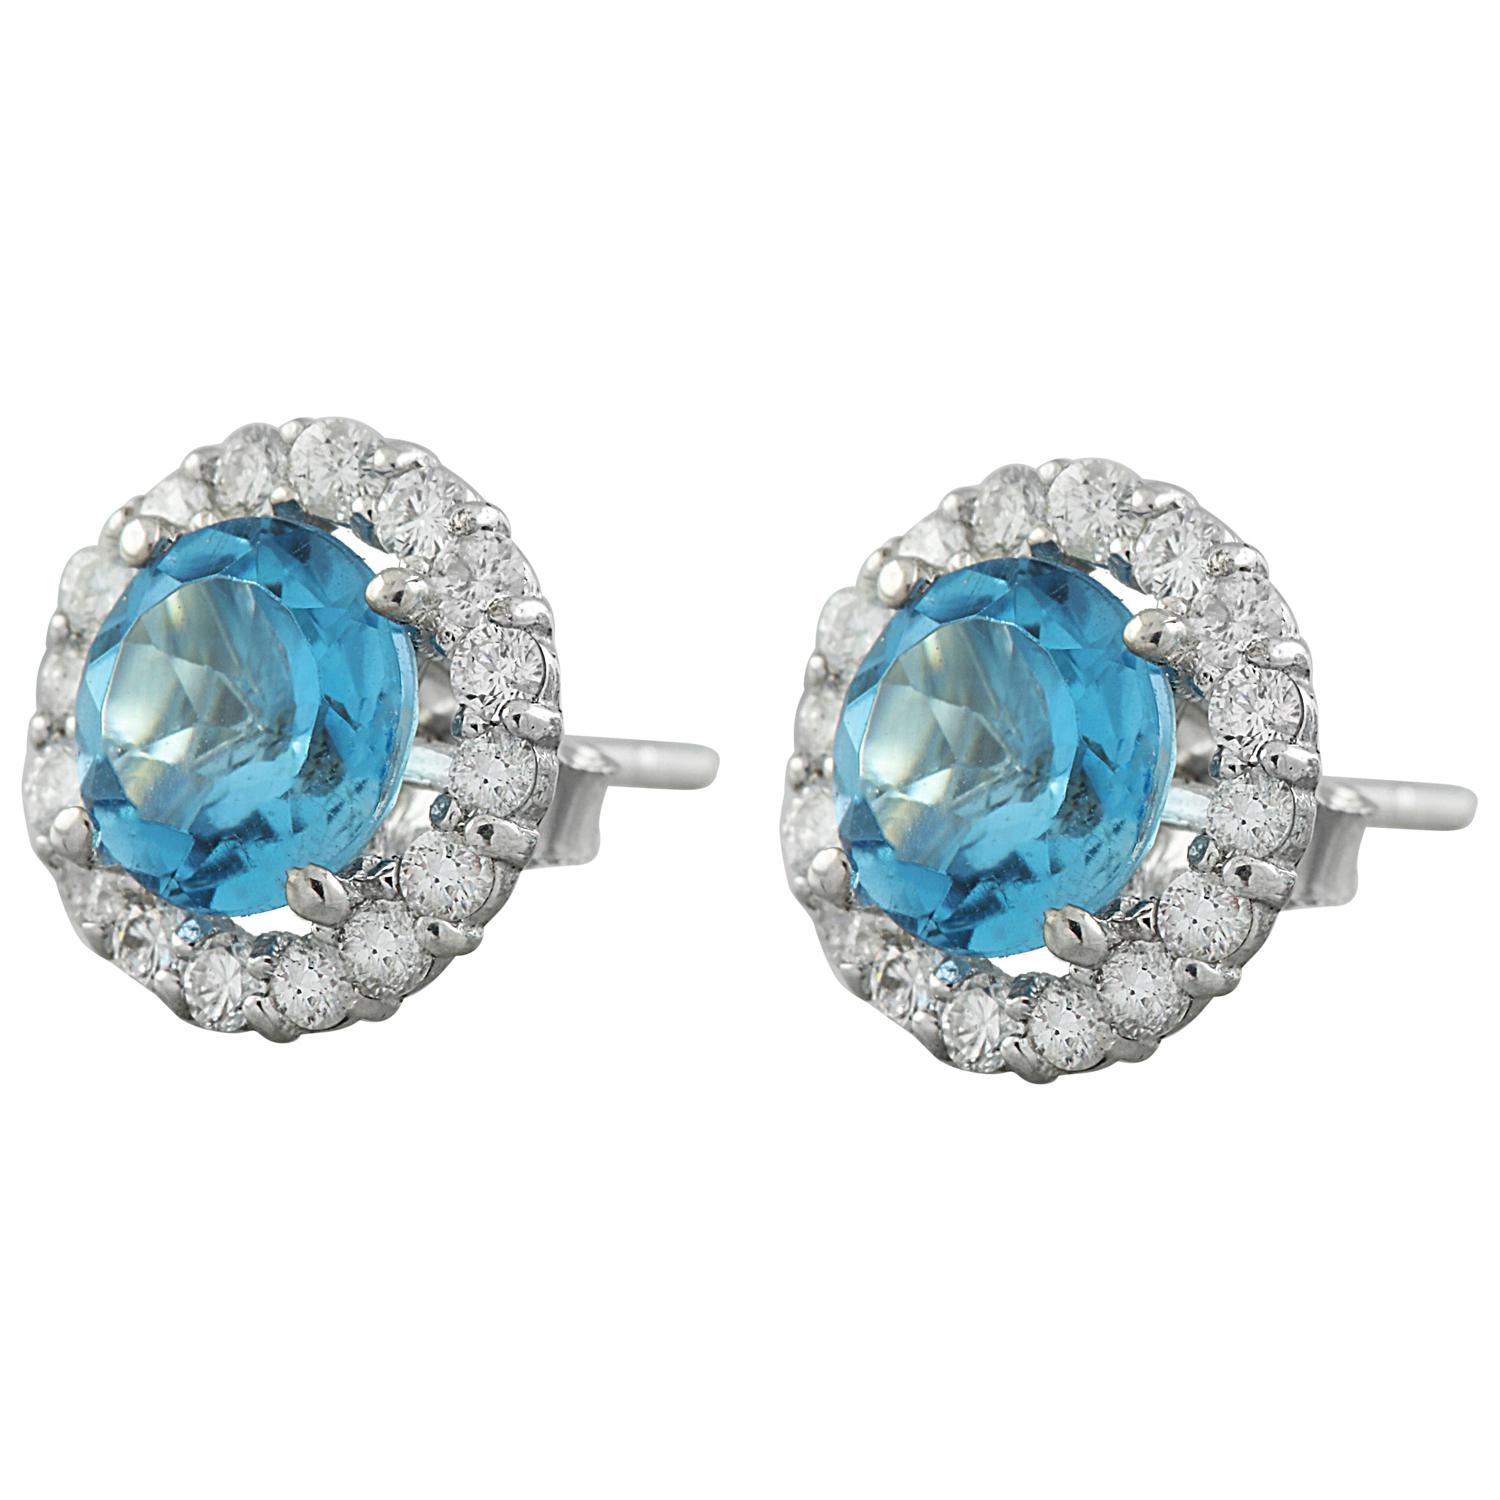 3.65 Carat Natural Topaz 14 Karat Solid White Gold Diamond Earrings
Stamped: 14K 
Total Earrings Weight: 1.5 Grams 
Topaz Weight: 3.00 Carat (7.00x7.00 Millimeters)  
Quantity: 2
Diamond Weight: 0.65 Carat (F-G Color, VS2-SI1 Clarity )
Quantity: